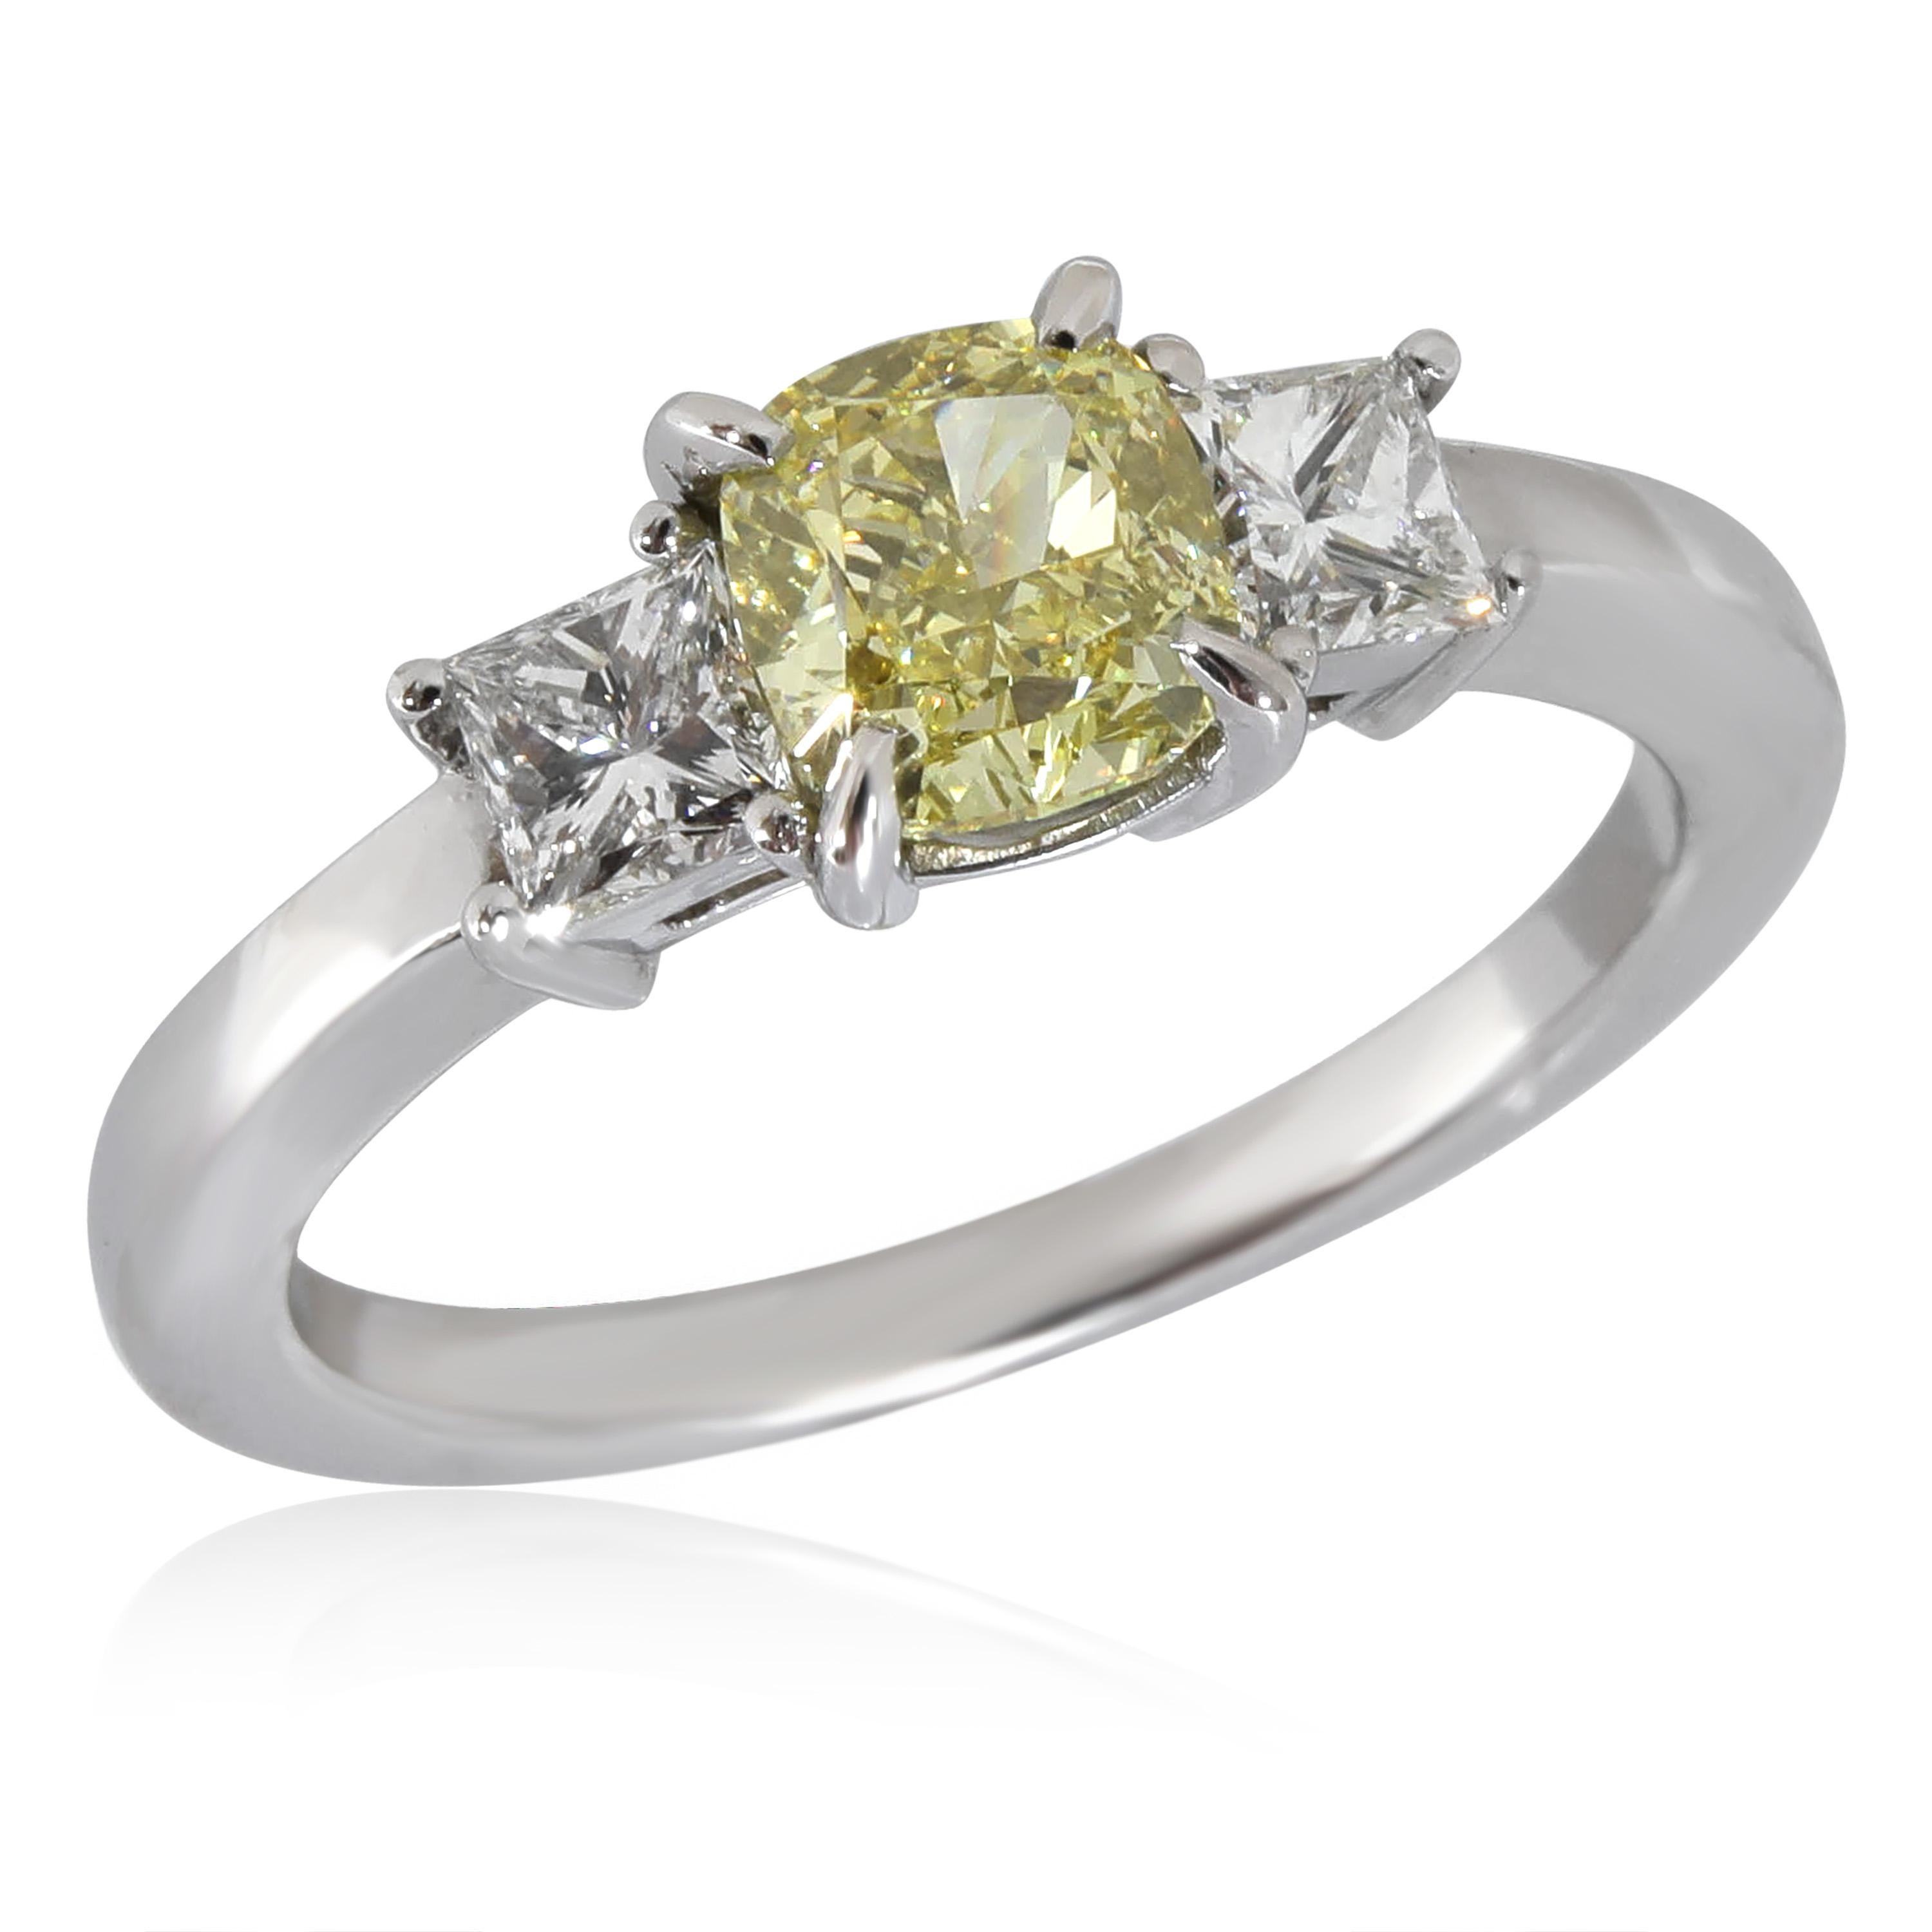 Women's Fancy Intense Yellow Cushion Engagement Ring in Platinum VS1 1.31 CTW For Sale